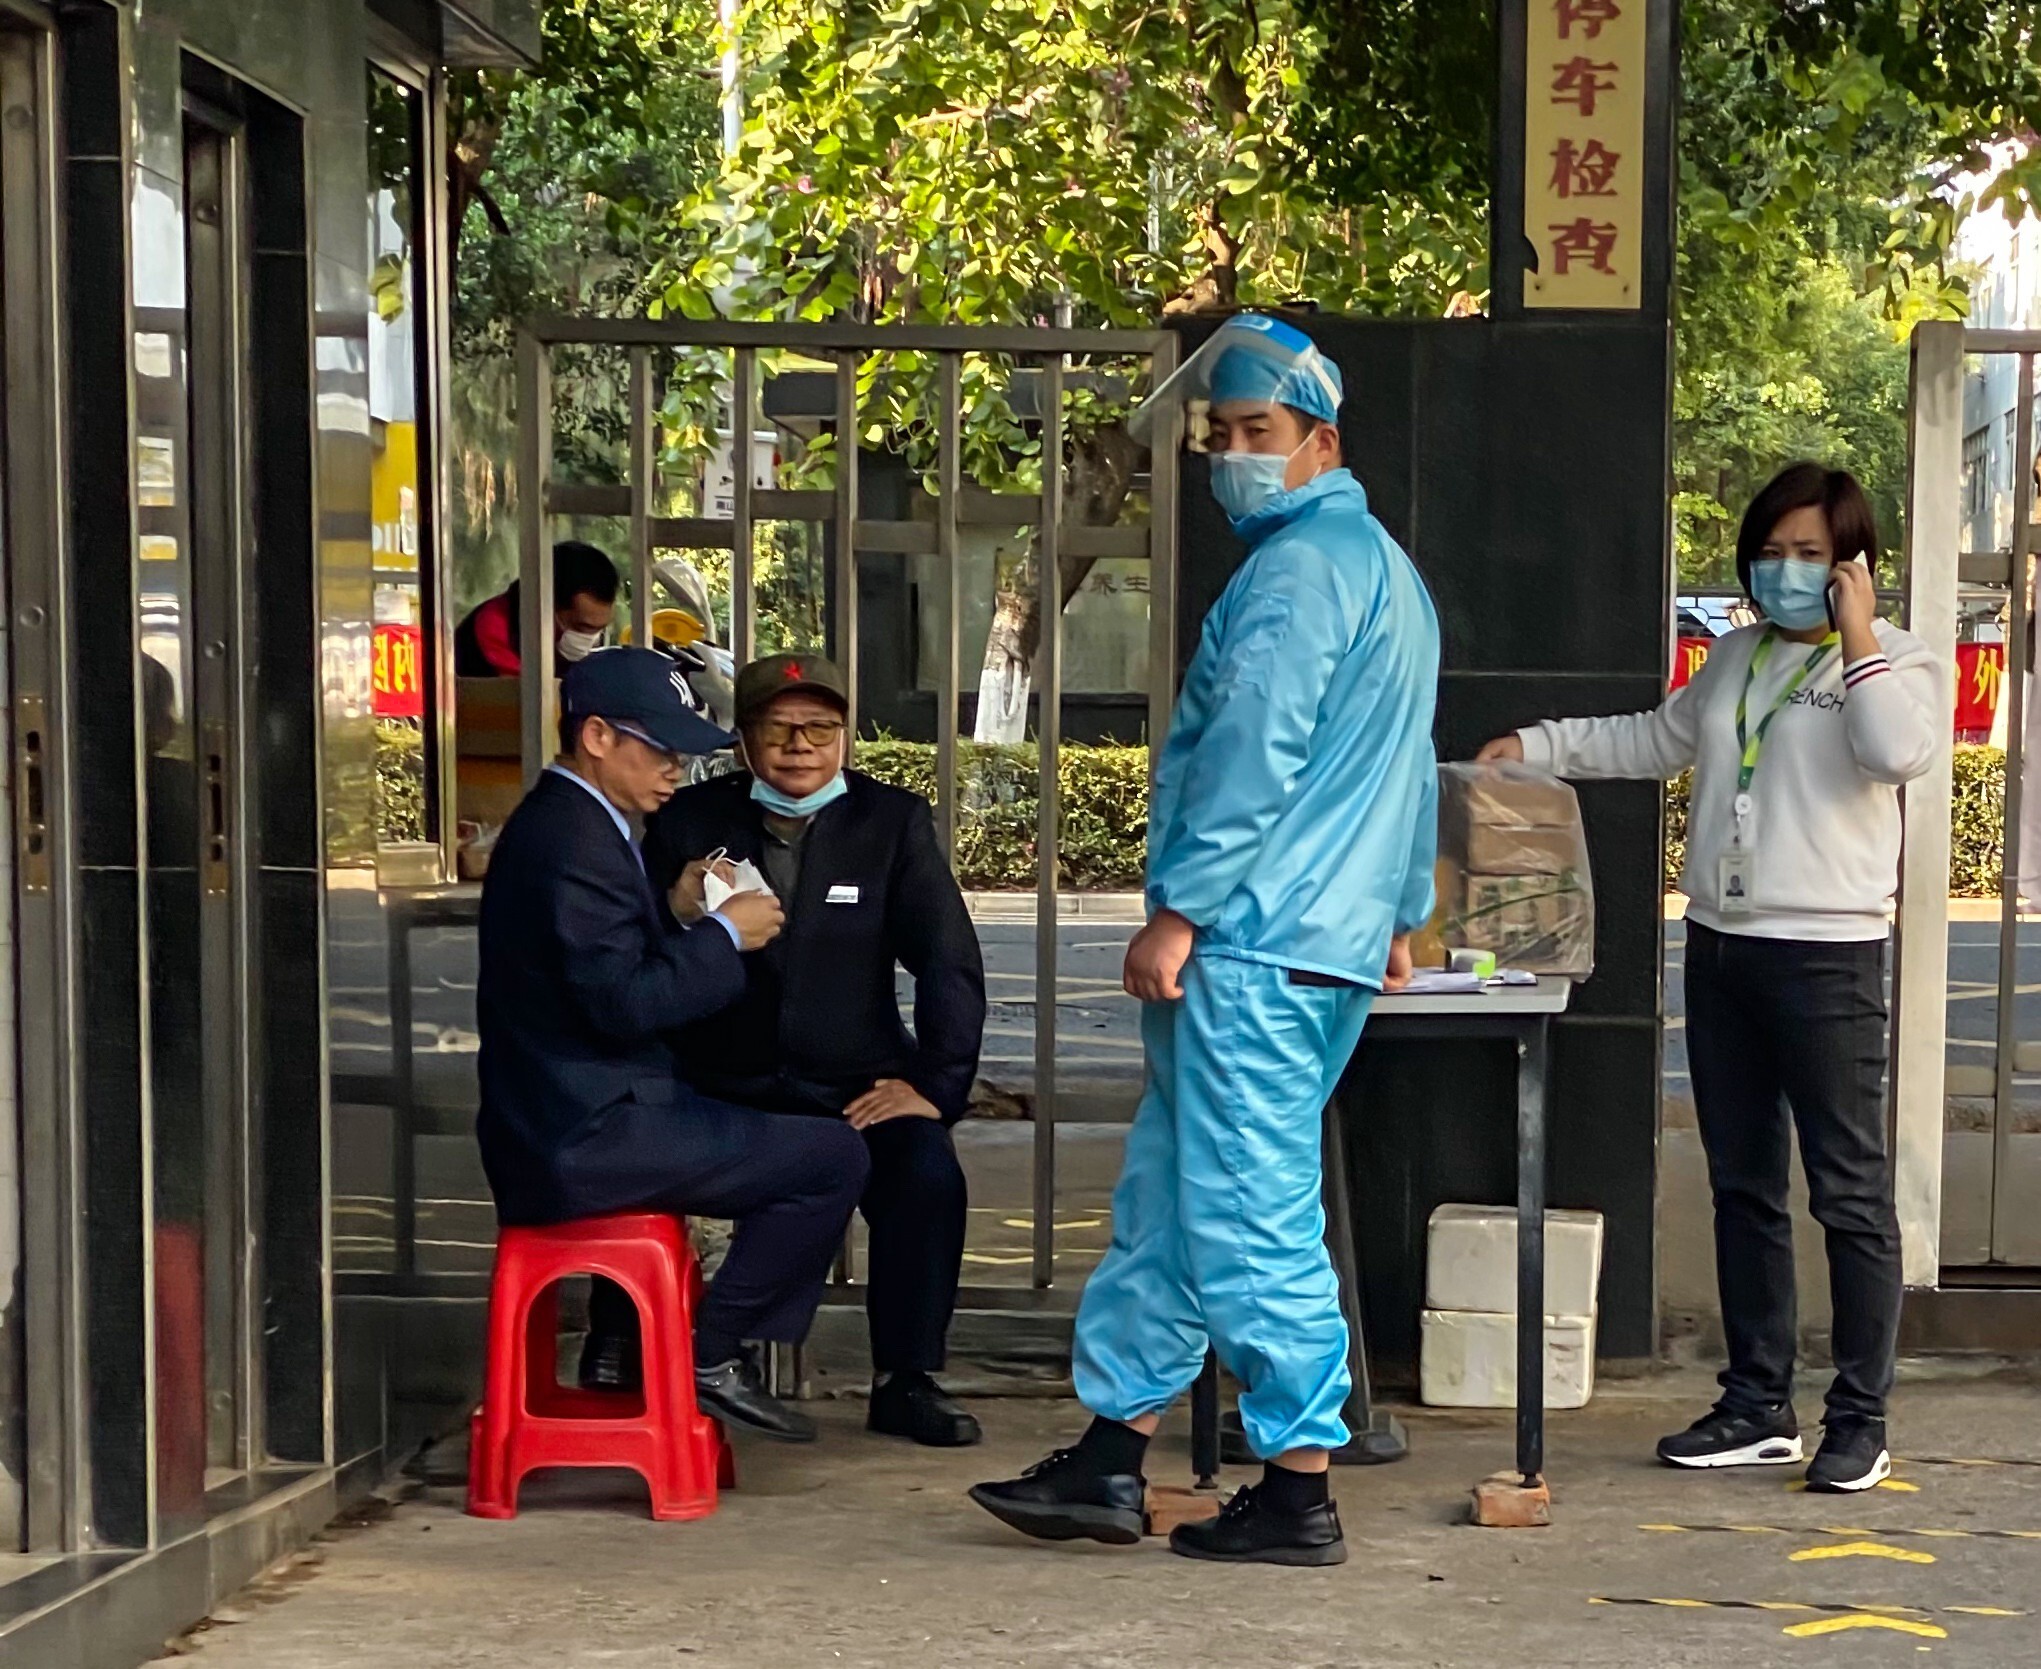 A security guard in protective gear in Shenzhen. Photo: Veronica Lin